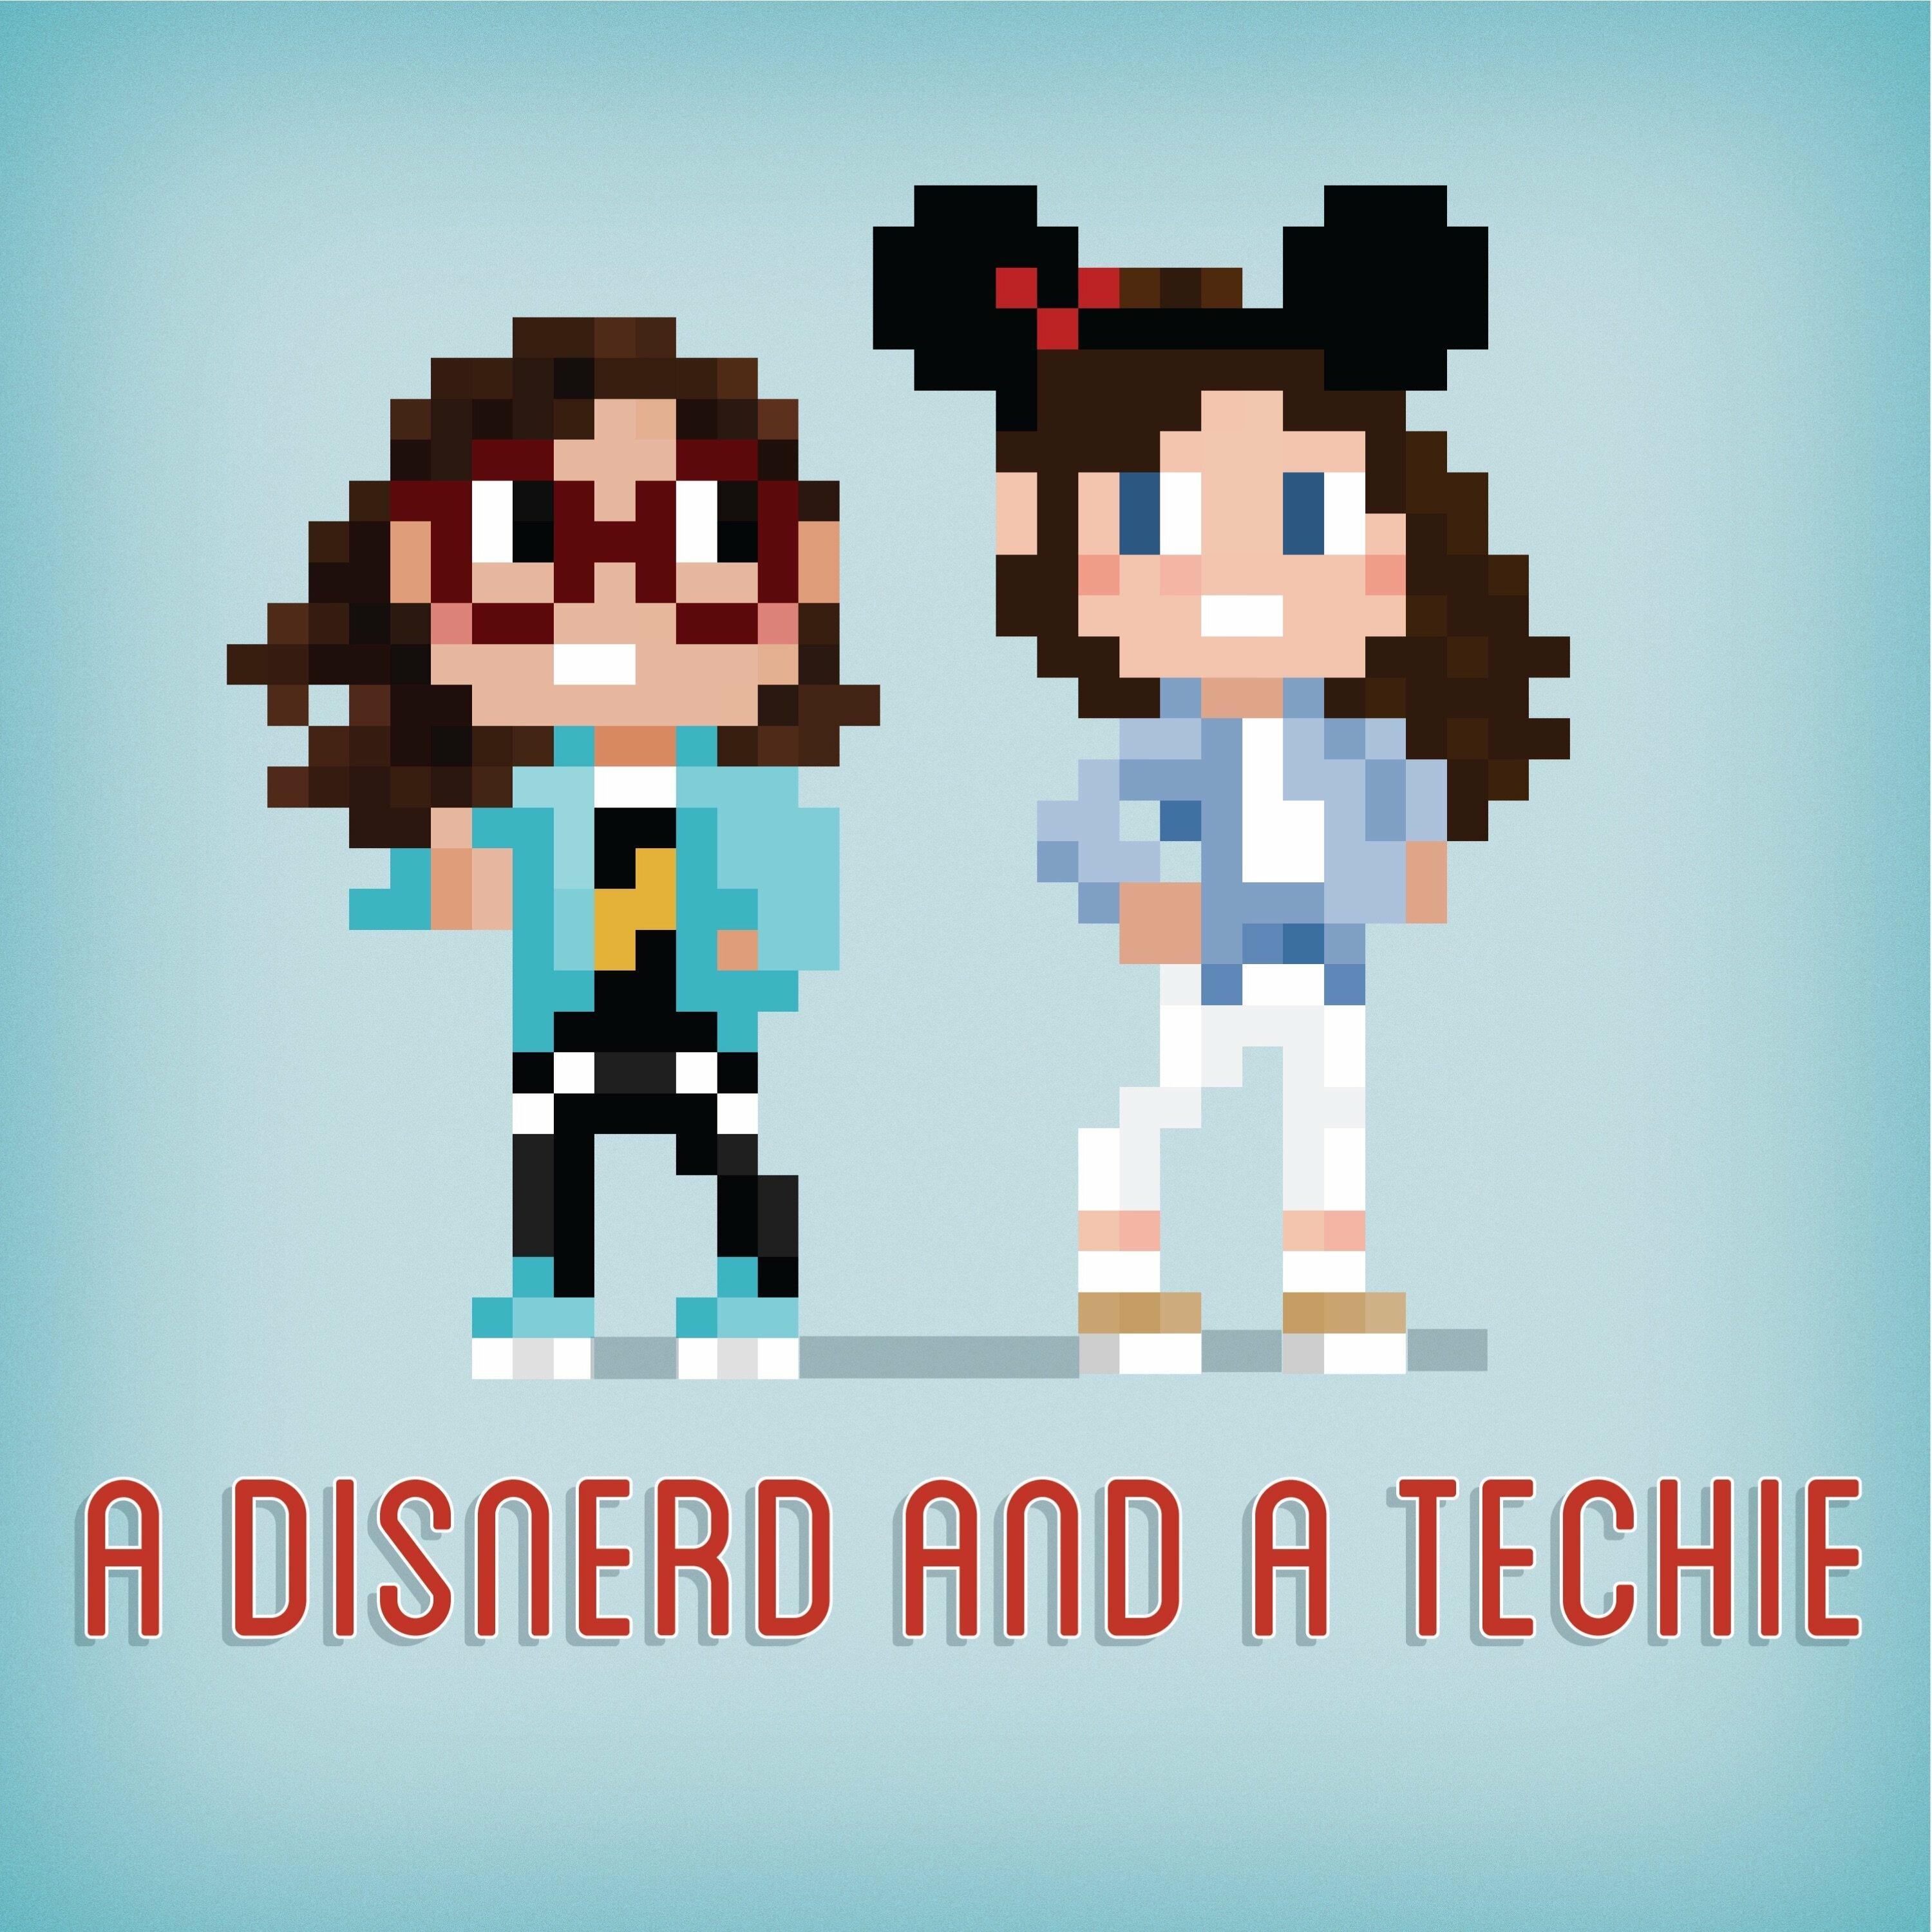 Listen To The A Disnerd And A Techie Podcast Episode Episode 1